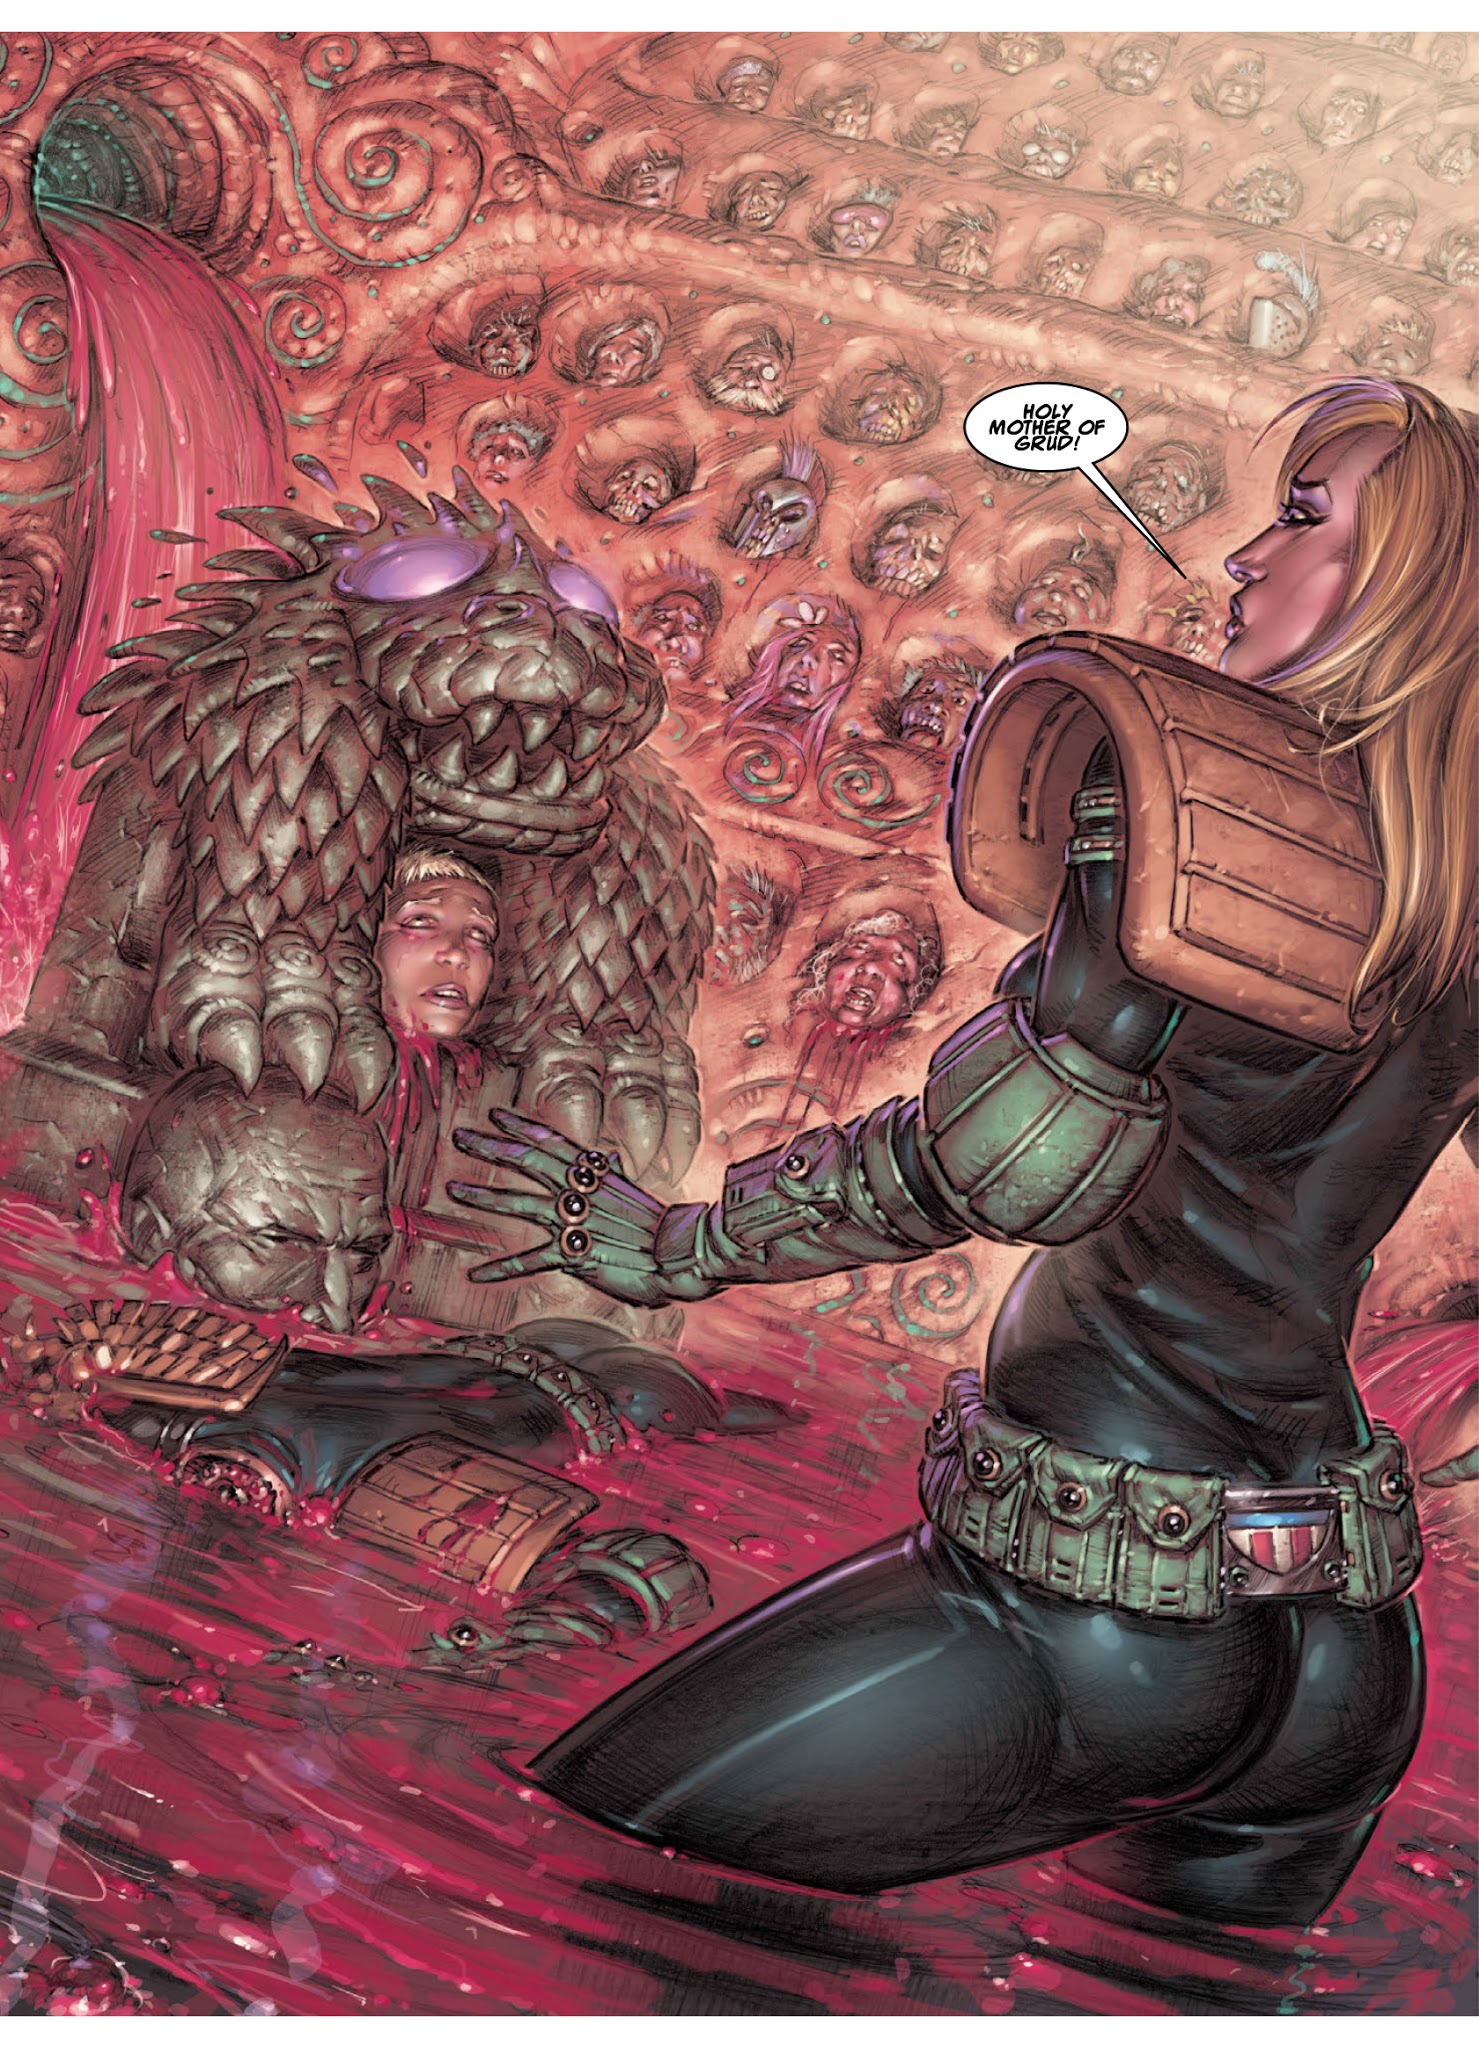 Read online Judge Anderson: The Psi Files comic -  Issue # TPB 5 - 267